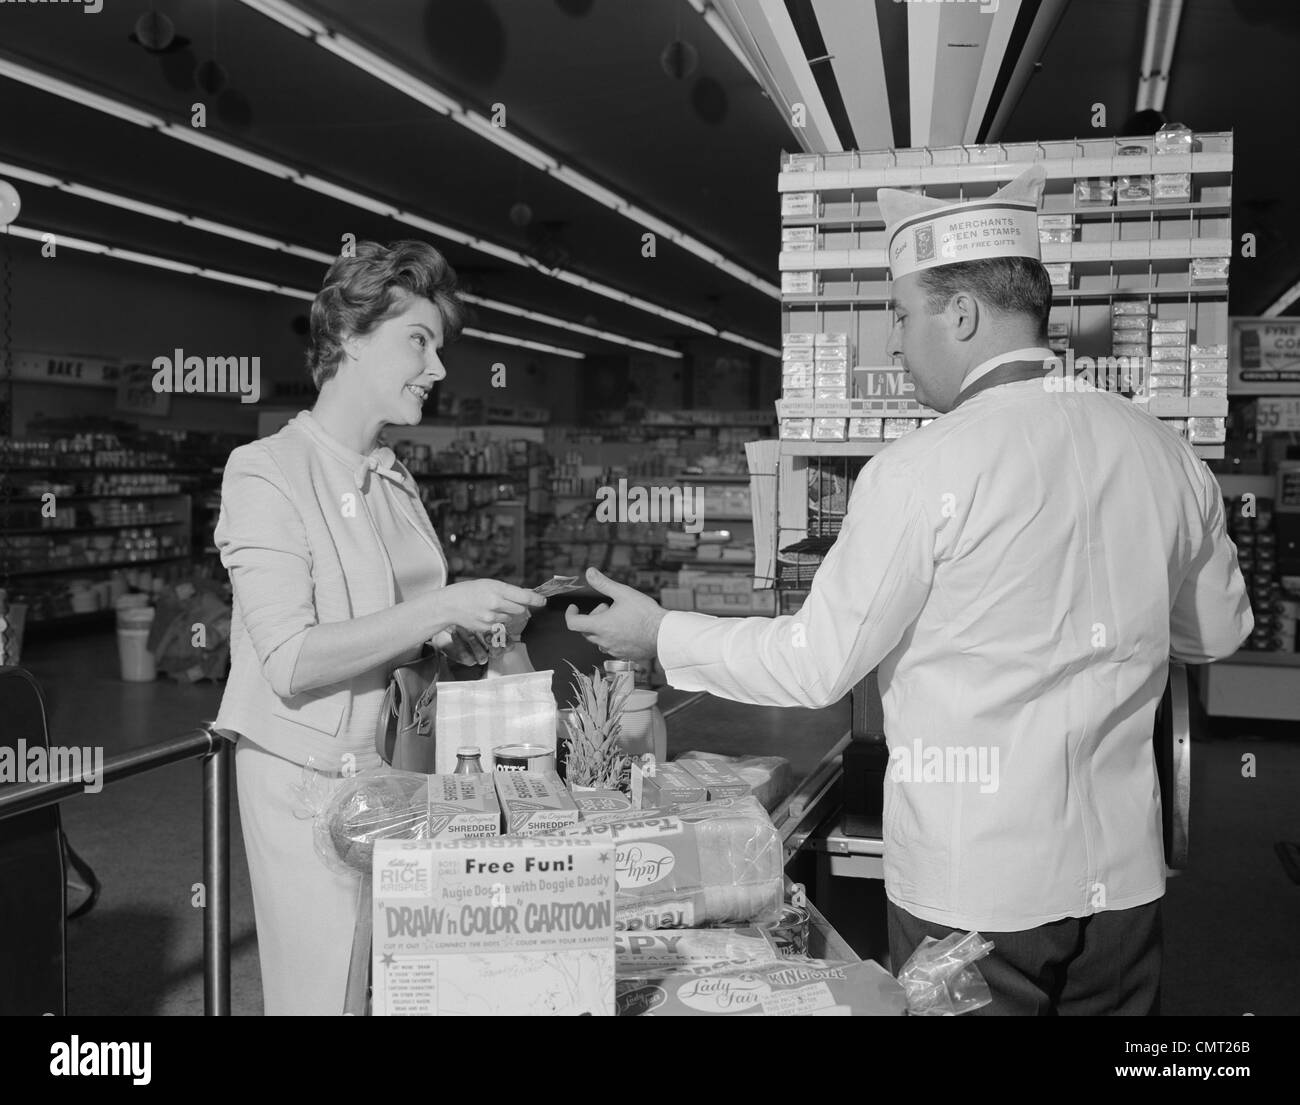 1960 WOMAN PAYING AT GROCERY STORE COMMANDER MALE CASHIER Banque D'Images